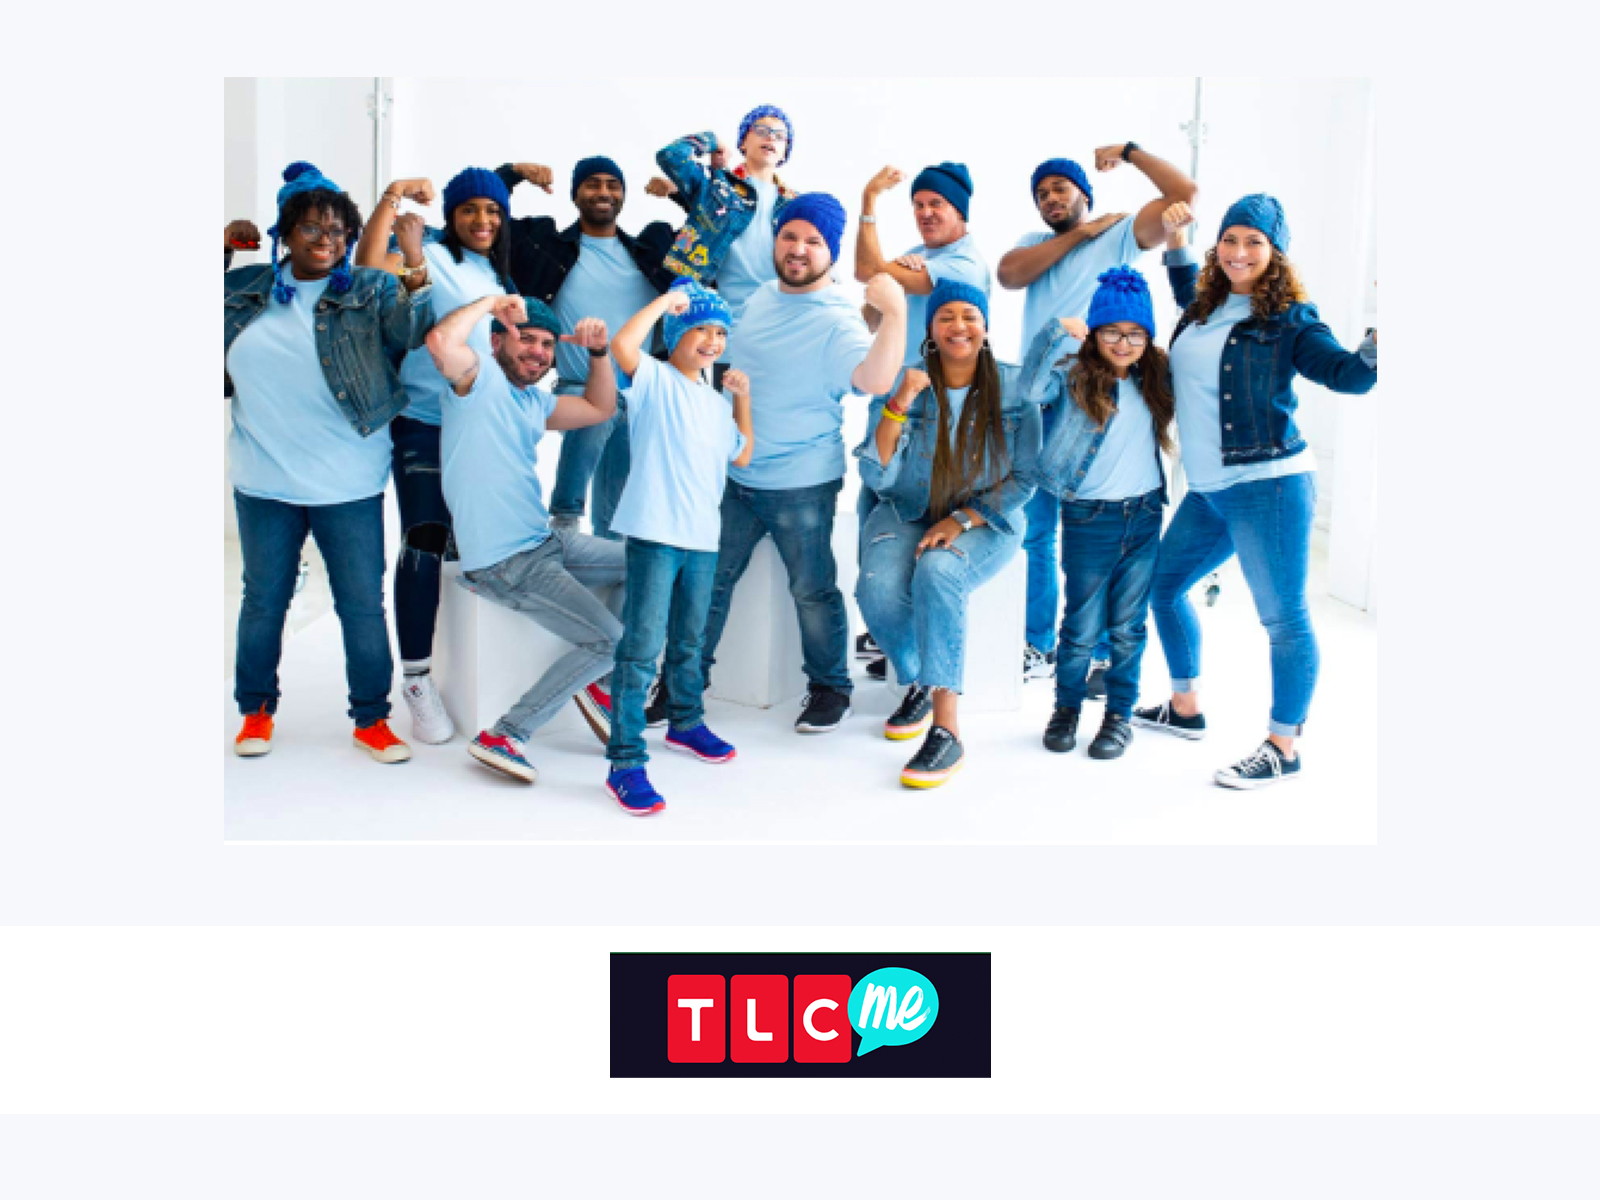 TLC me logo with group photo